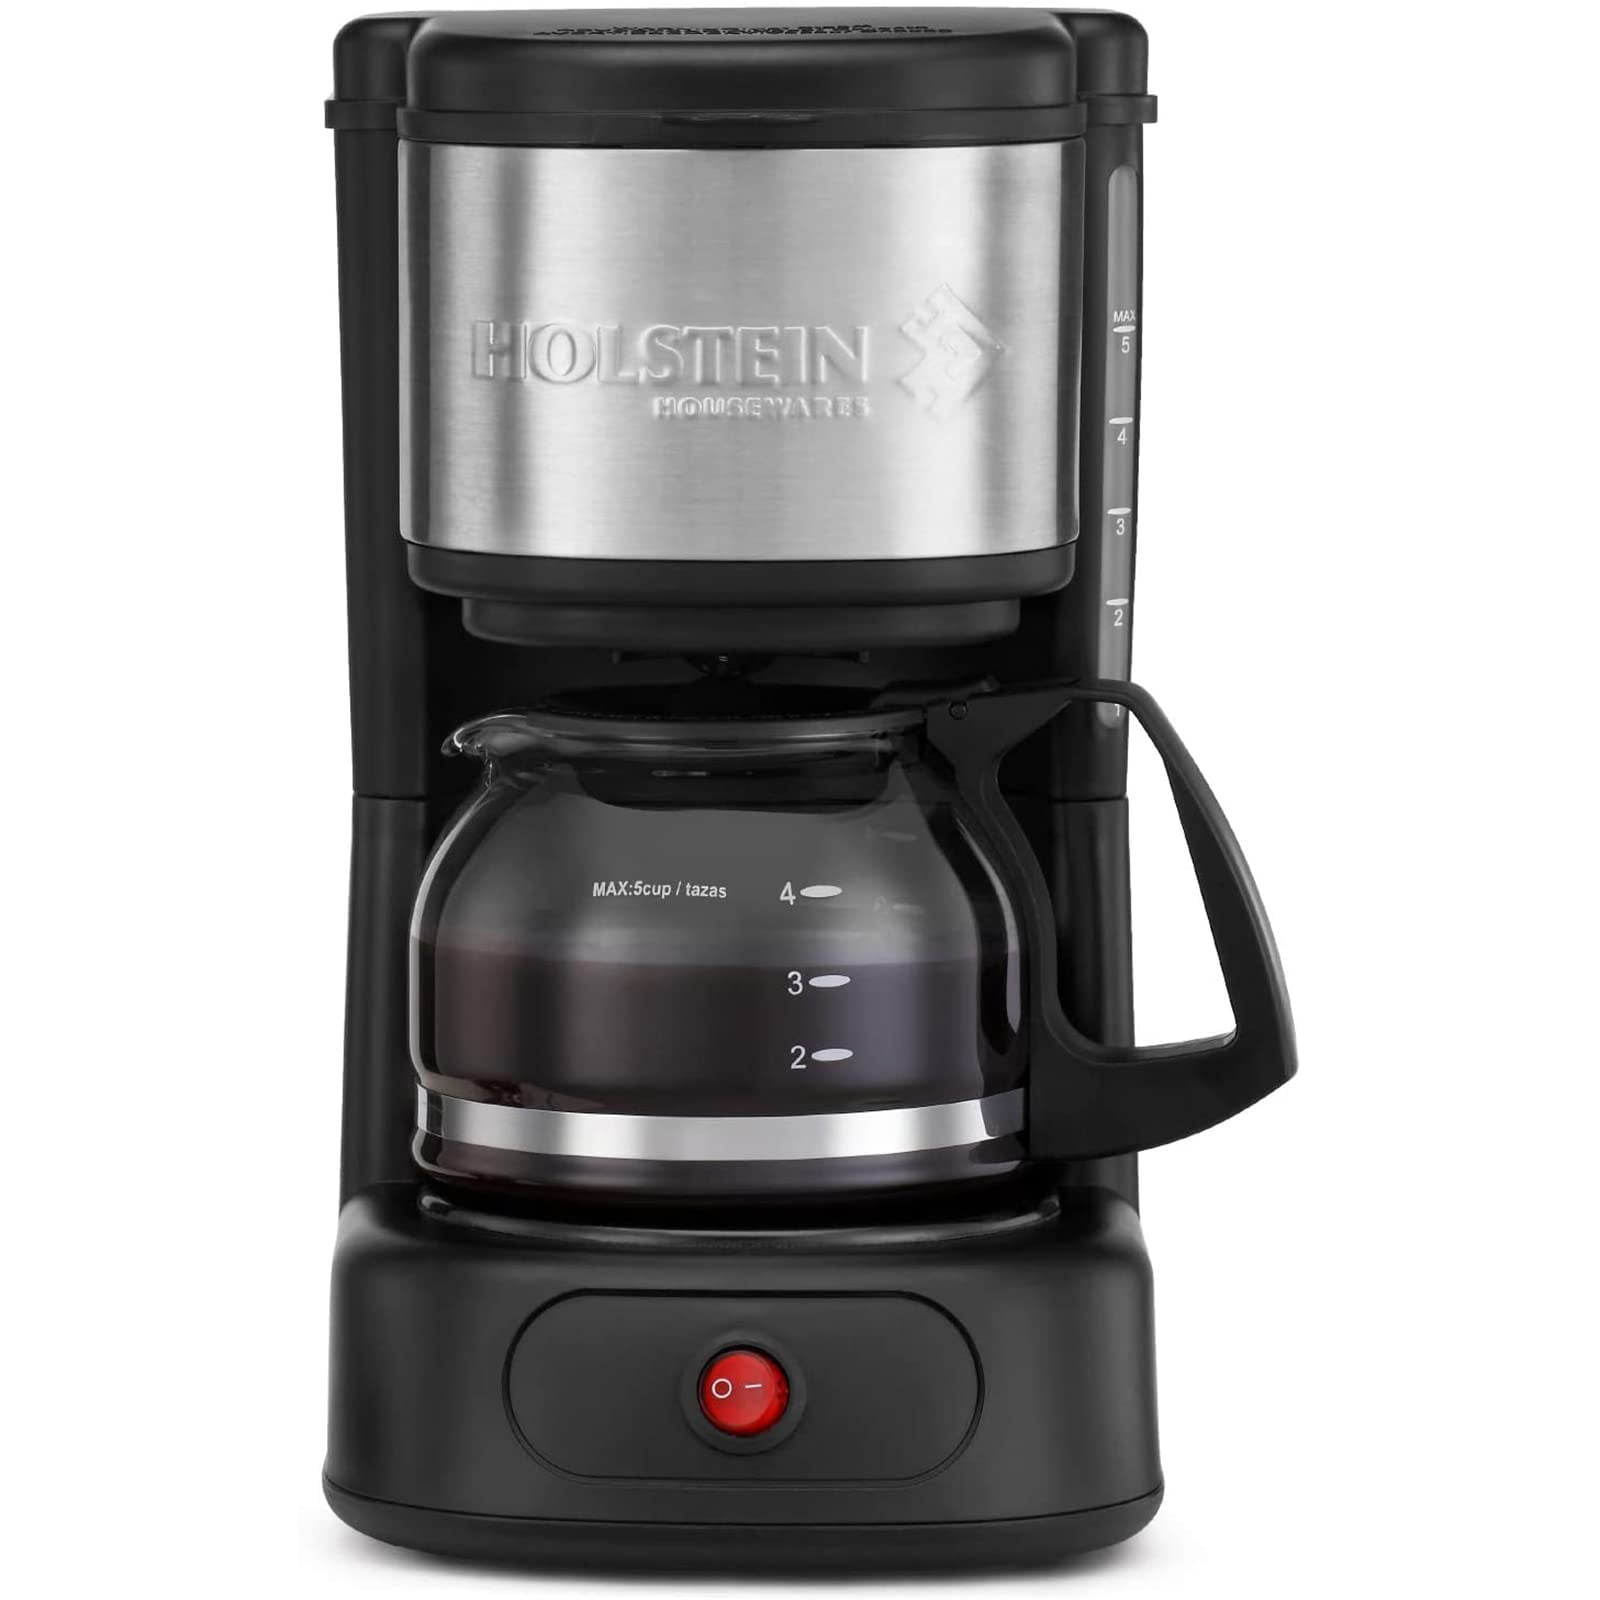 Holstein Housewares 5 Cup Coffee Maker - Space-Saving Design, Auto Pause  and Serve, Removable Filter Basket, and Full View Water Window - Perfect  for Brewing Rich-Tasting Coffee at Home - Black 